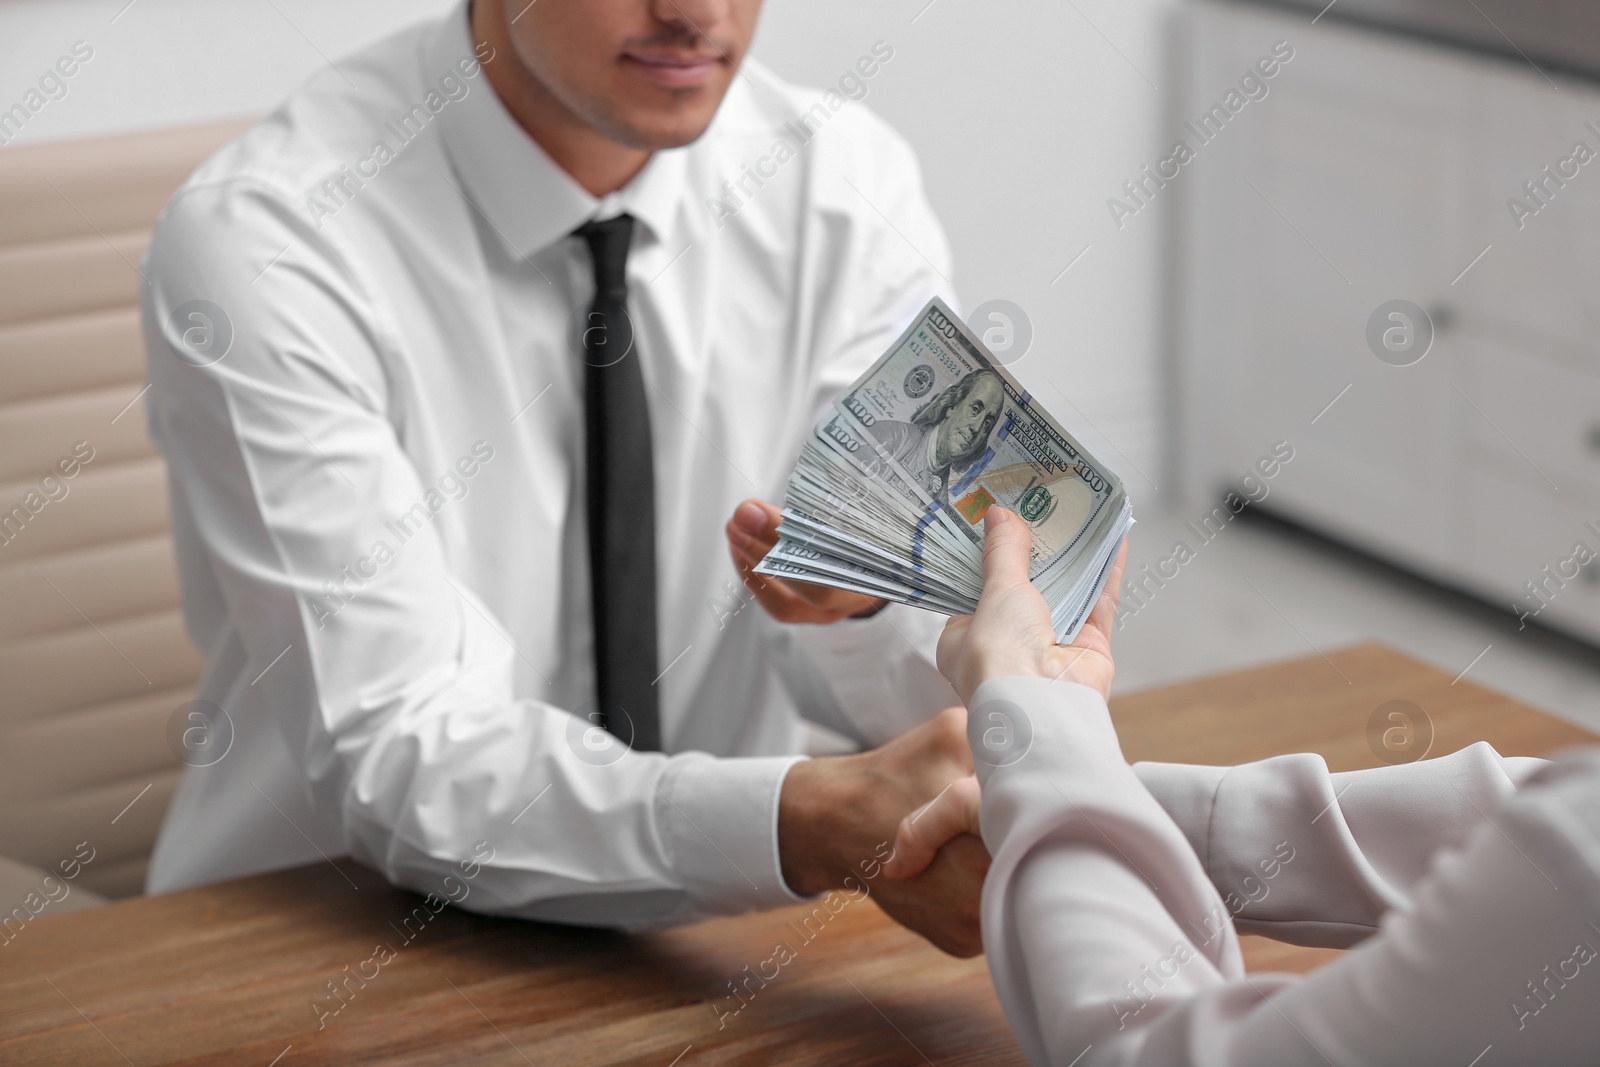 Photo of Woman shaking hands with man and offering bribe at table indoors, closeup